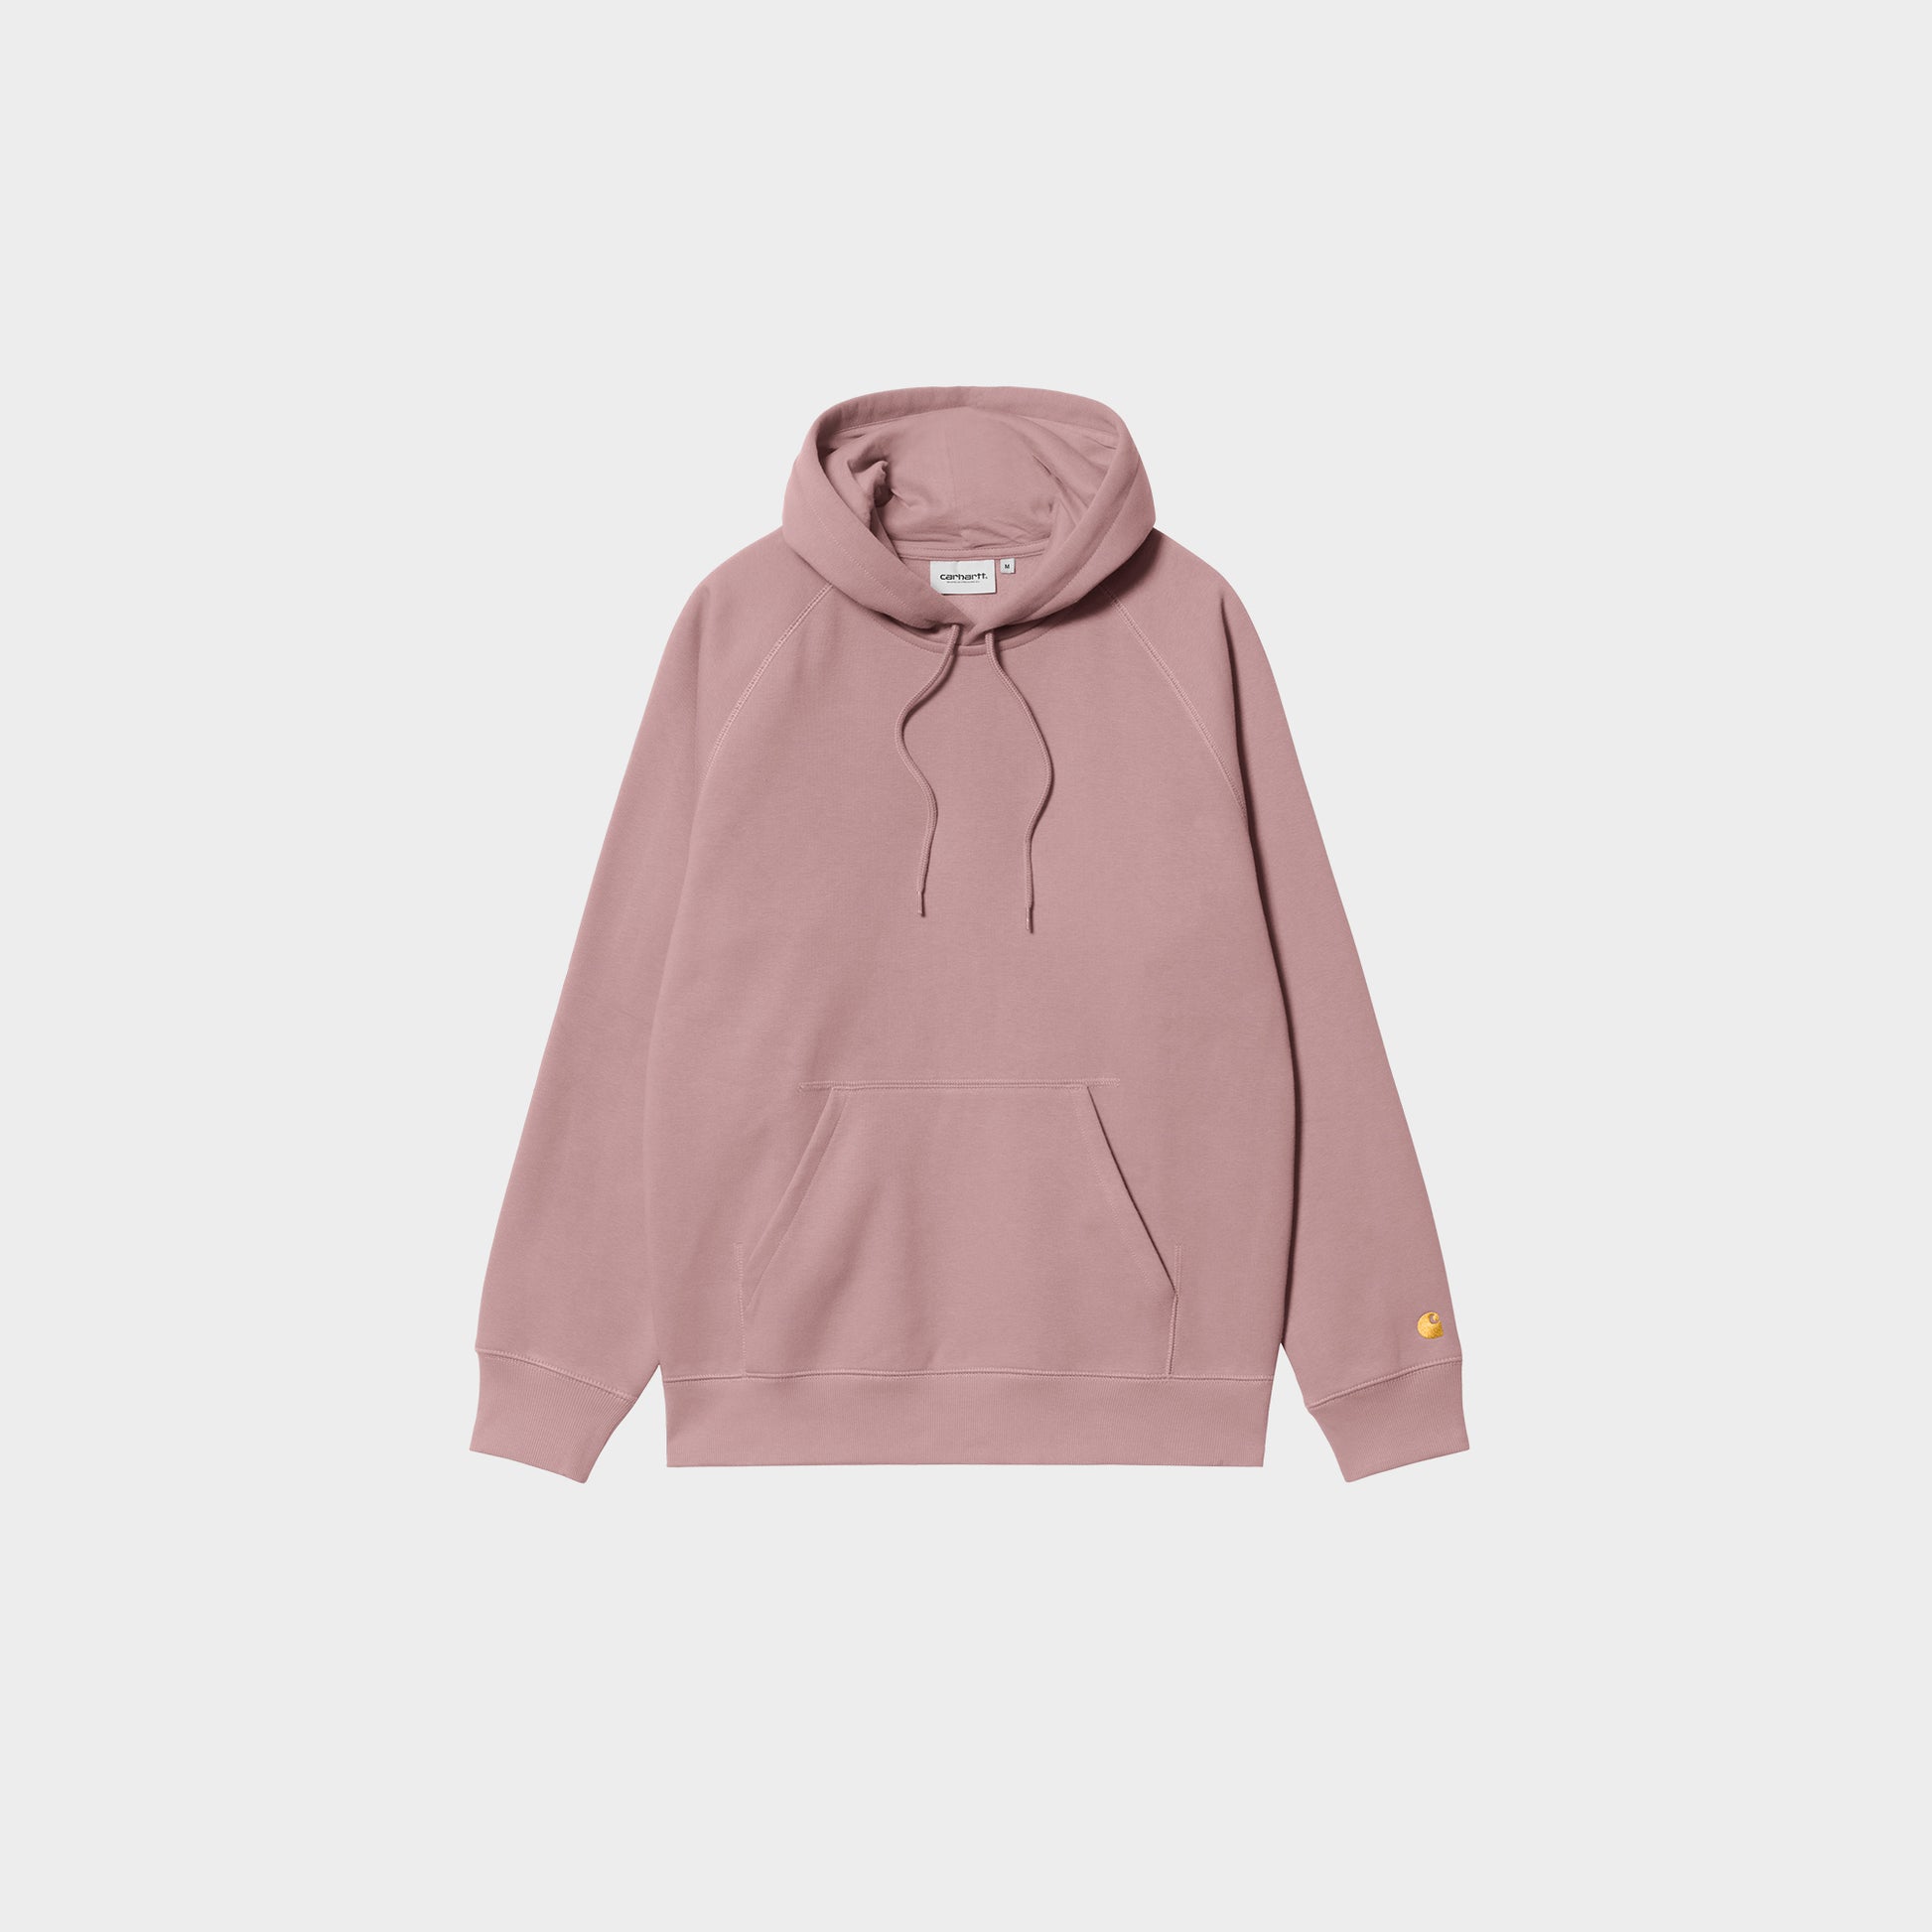 Carhartt WIP Hooded Chase Sweatshirt in Farbe glassy_Pink_Gold